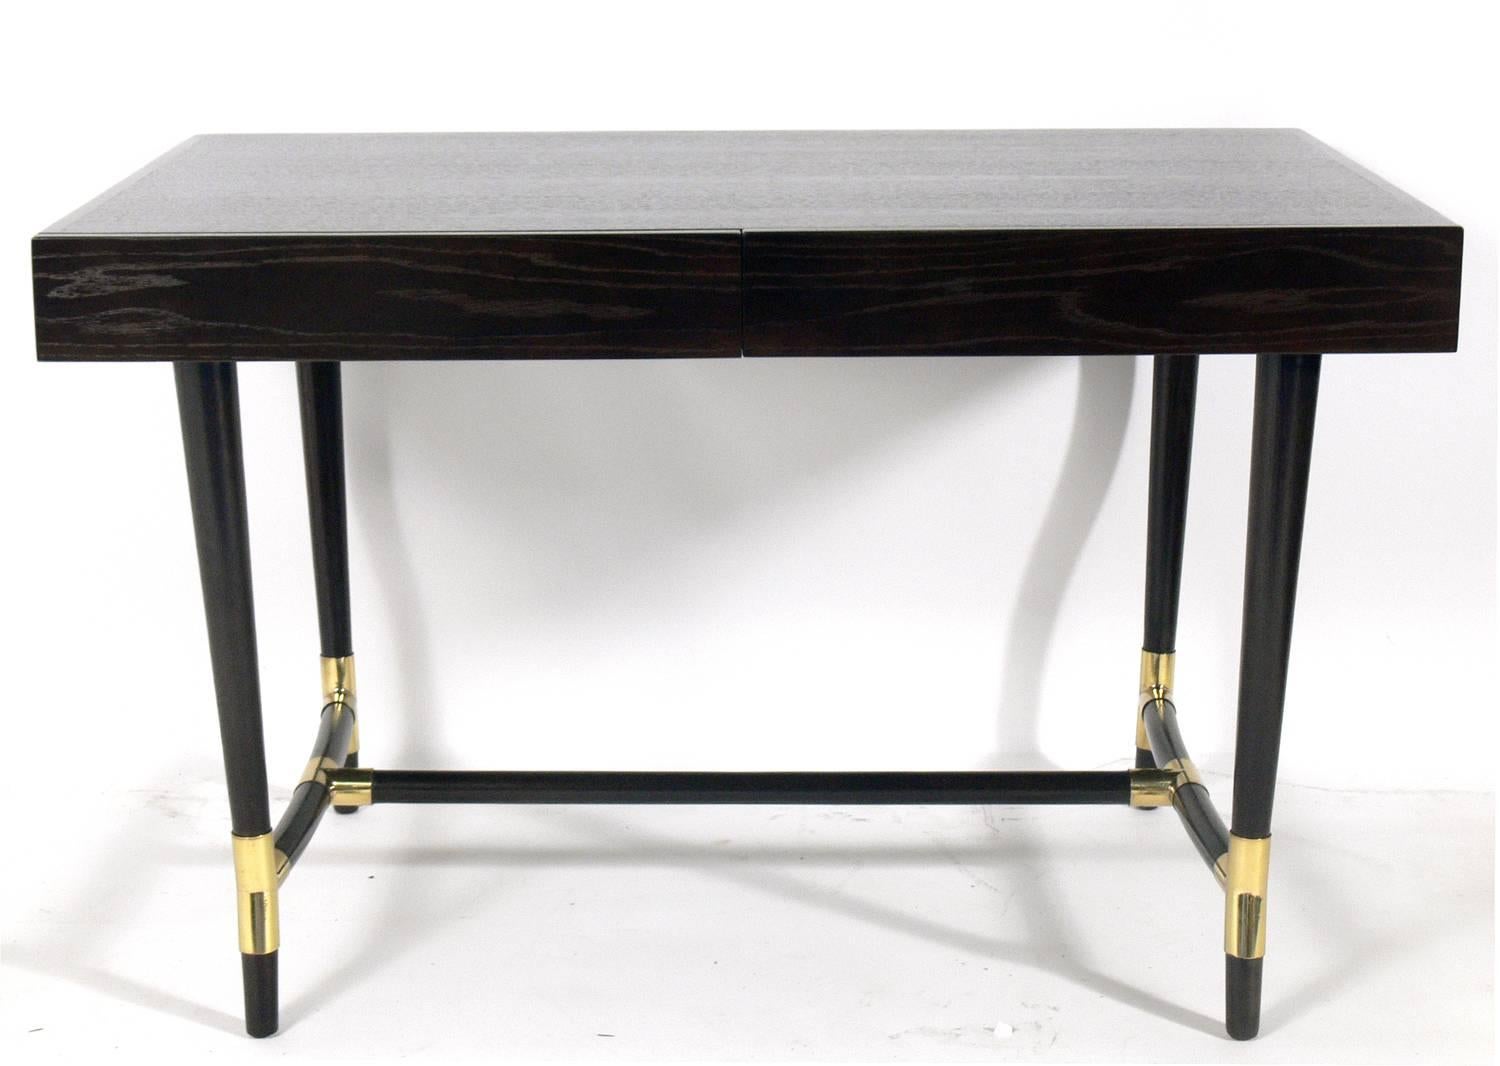 Elegant ebonized and brass desk, American, circa 1960s. This piece has been completely restored in an ultra-deep brown (almost black) finish with the brass elements hand polished and lacquered.
It is a versatile size and can be used as a desk,